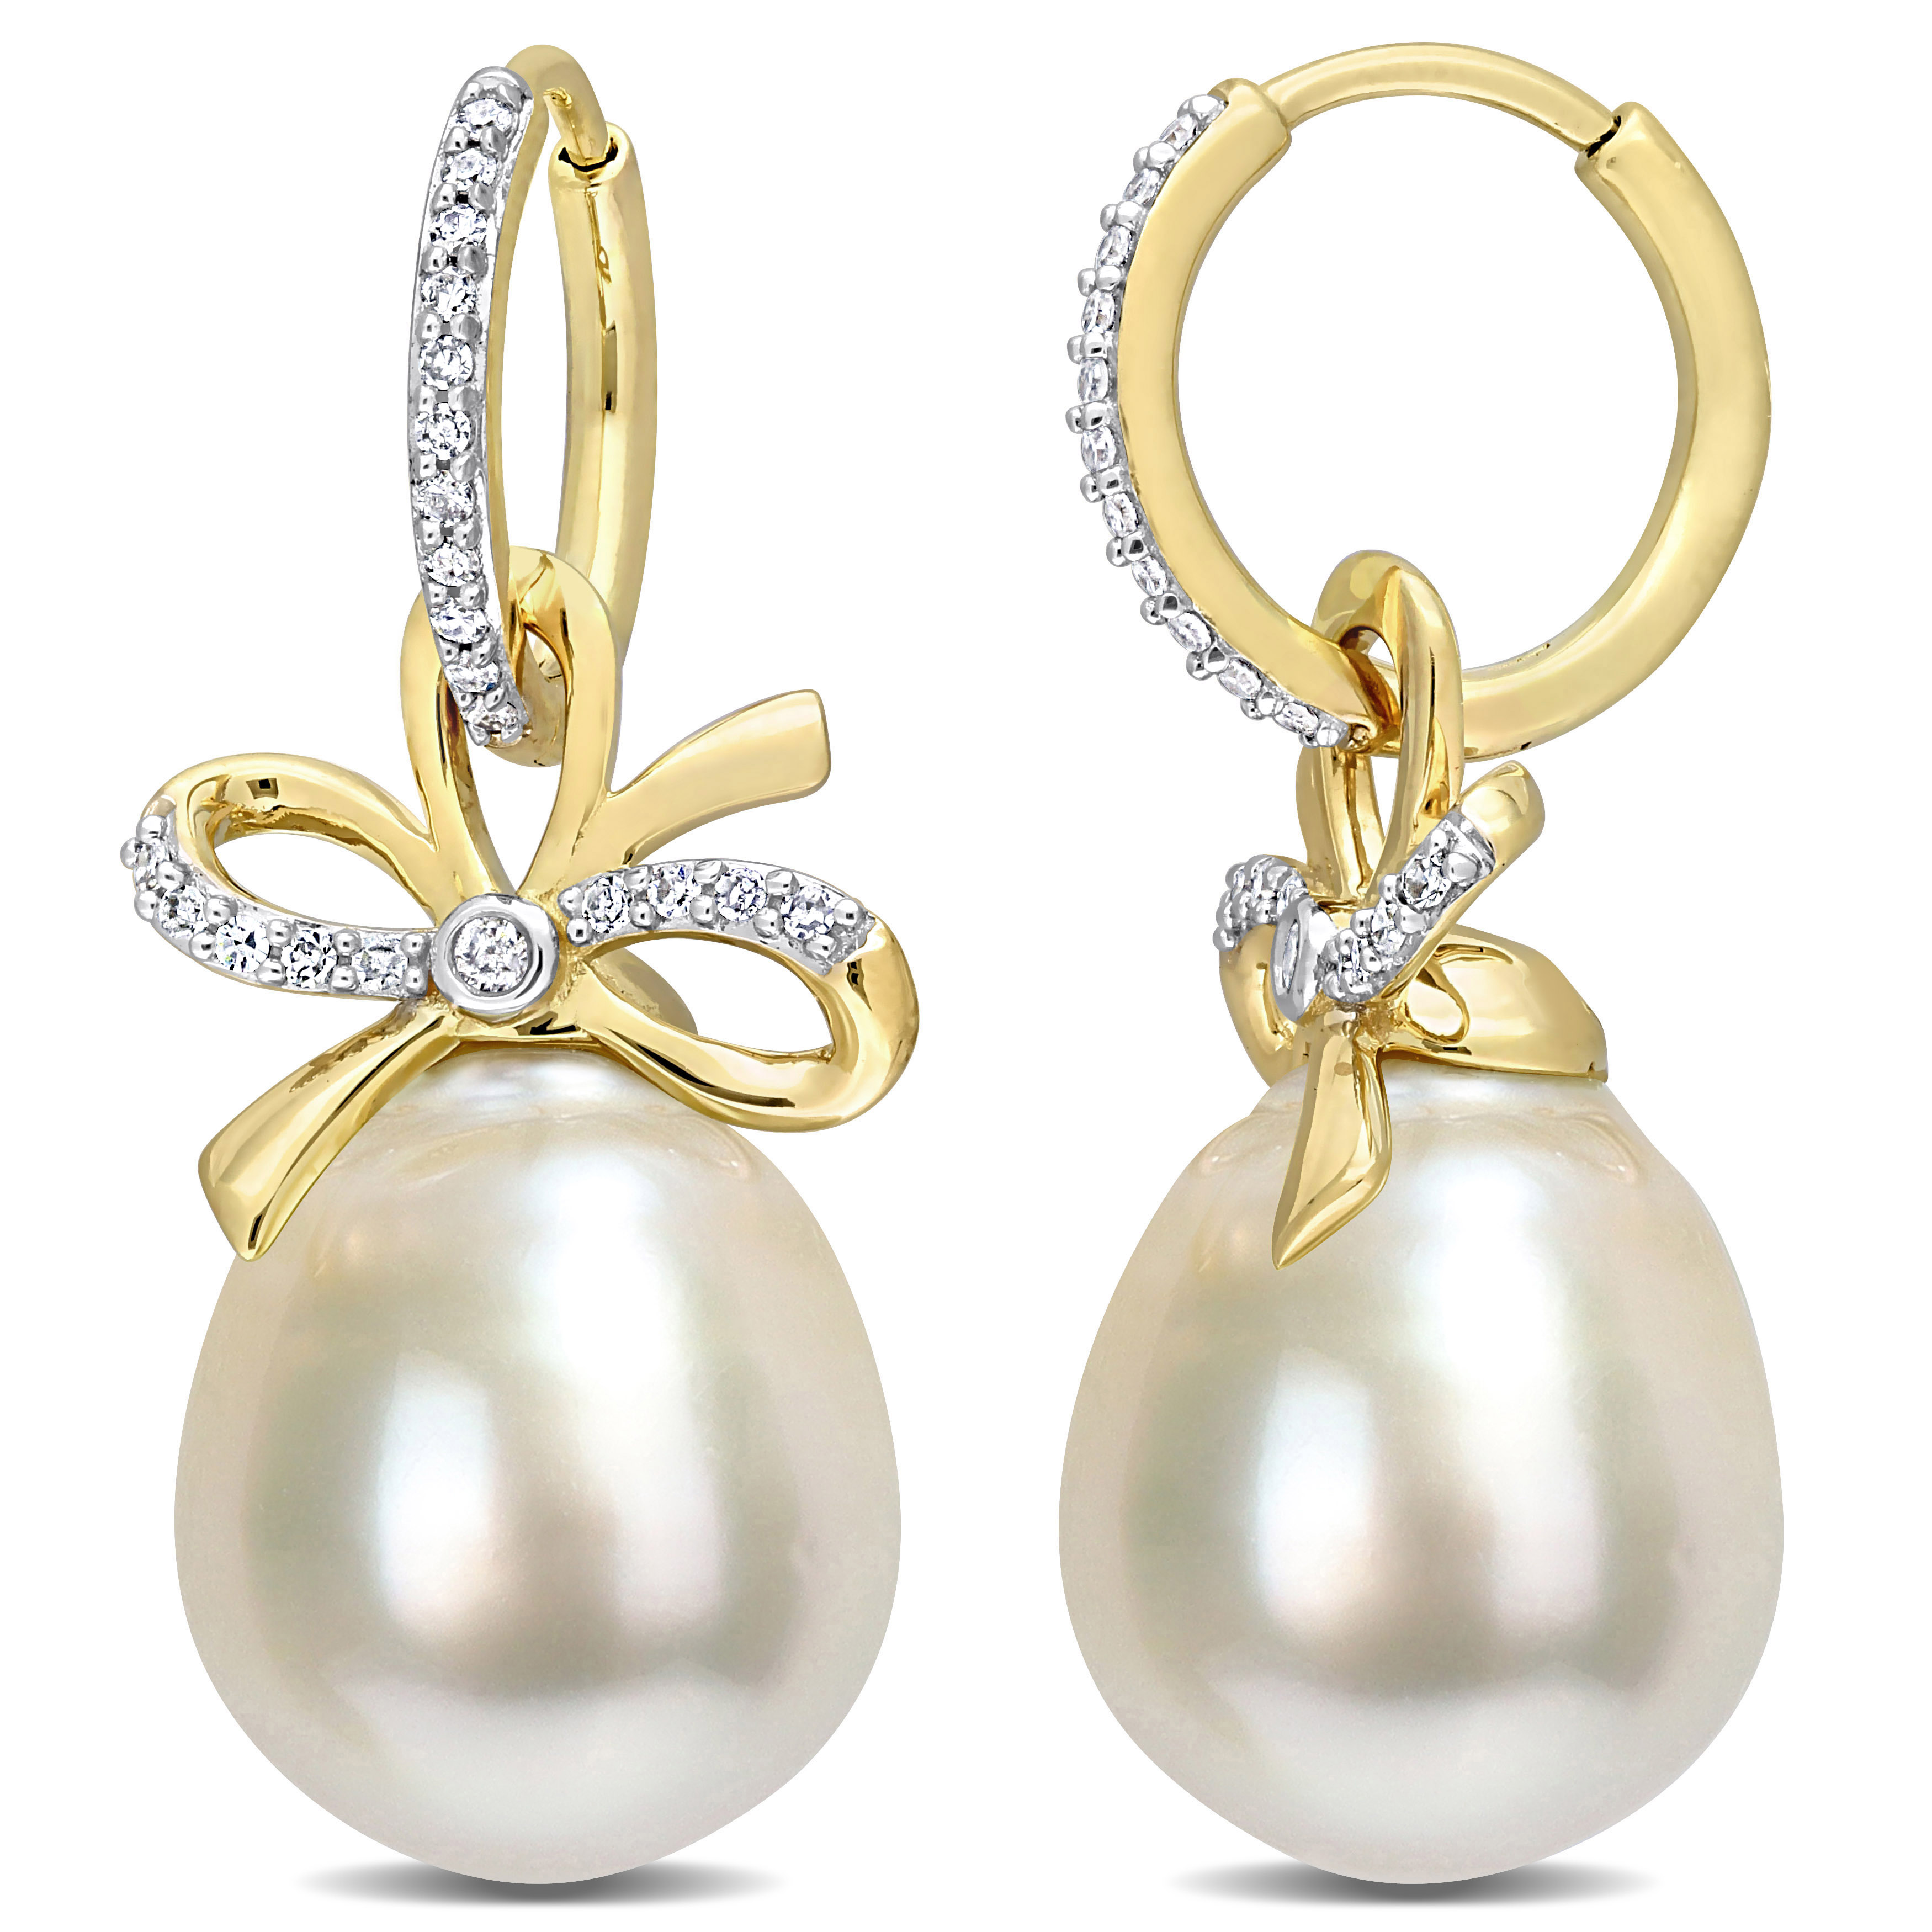 12-12.5 MM Oval Golden South Sea Cultured Pearl & 1/4 CT TW Diamond Bow Huggie Earrings in 14k Yellow Gold